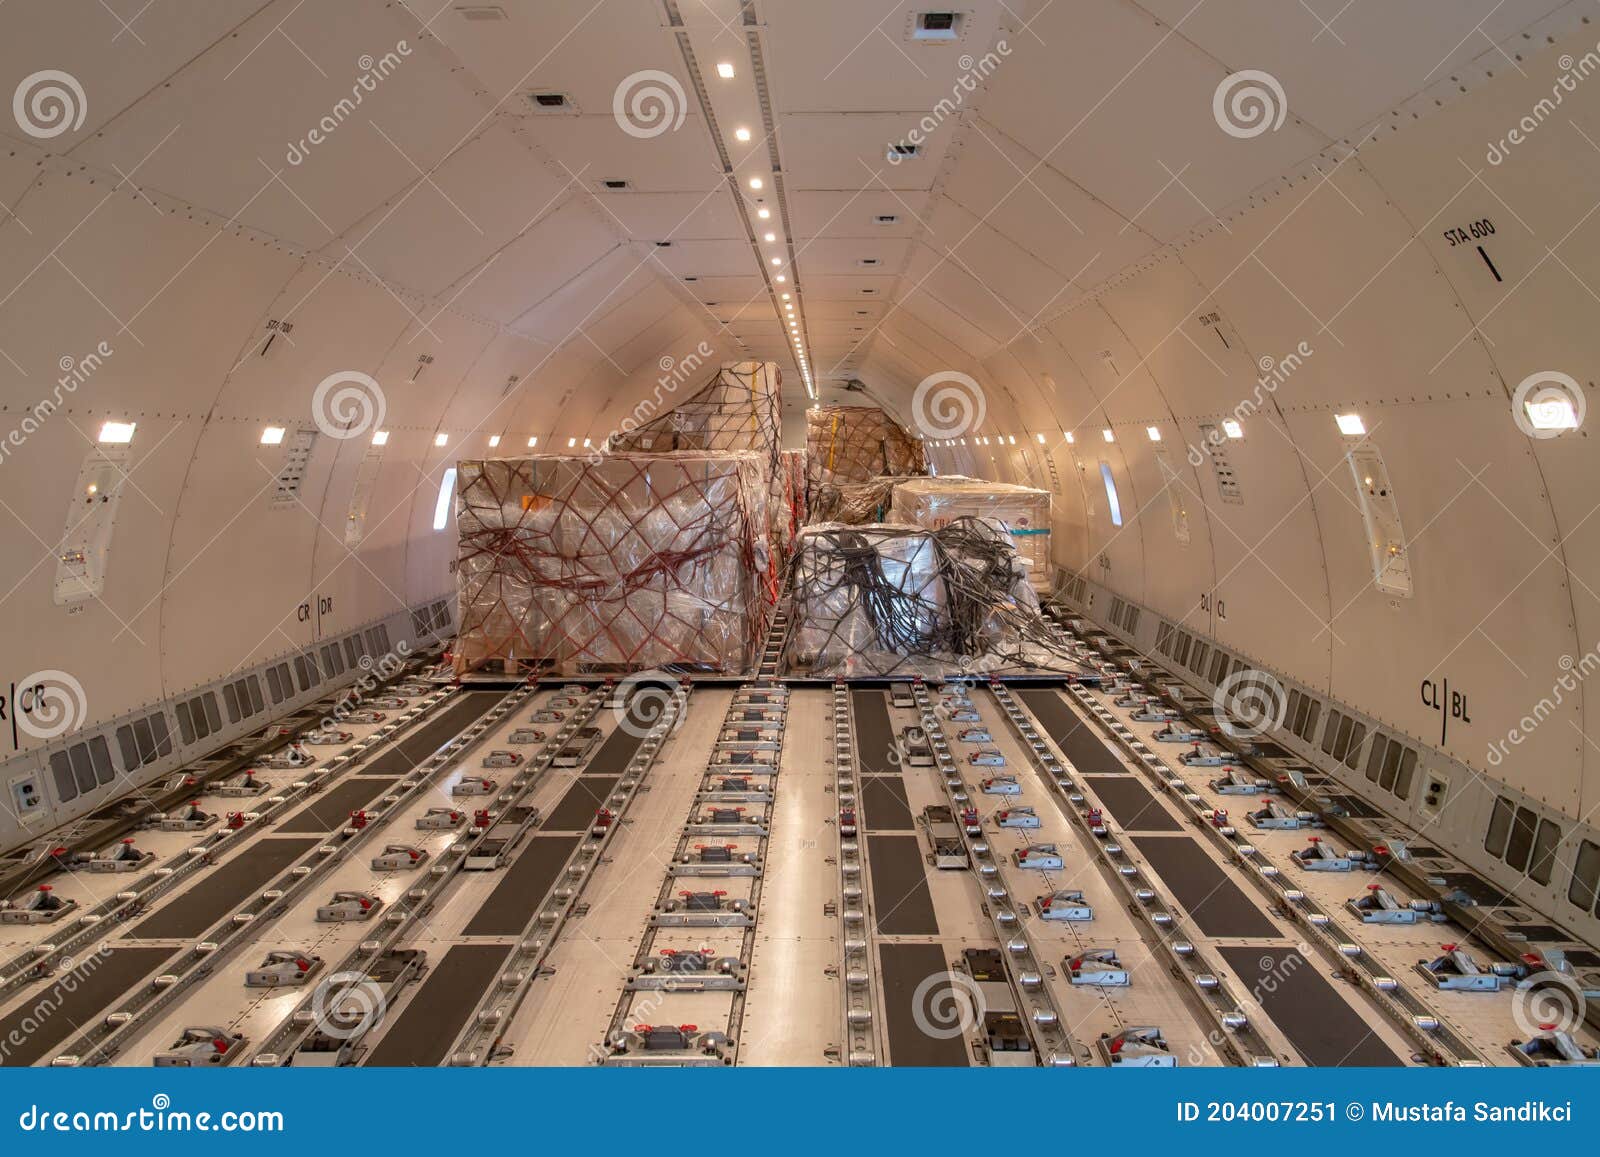 cargo aircraft interior with containers